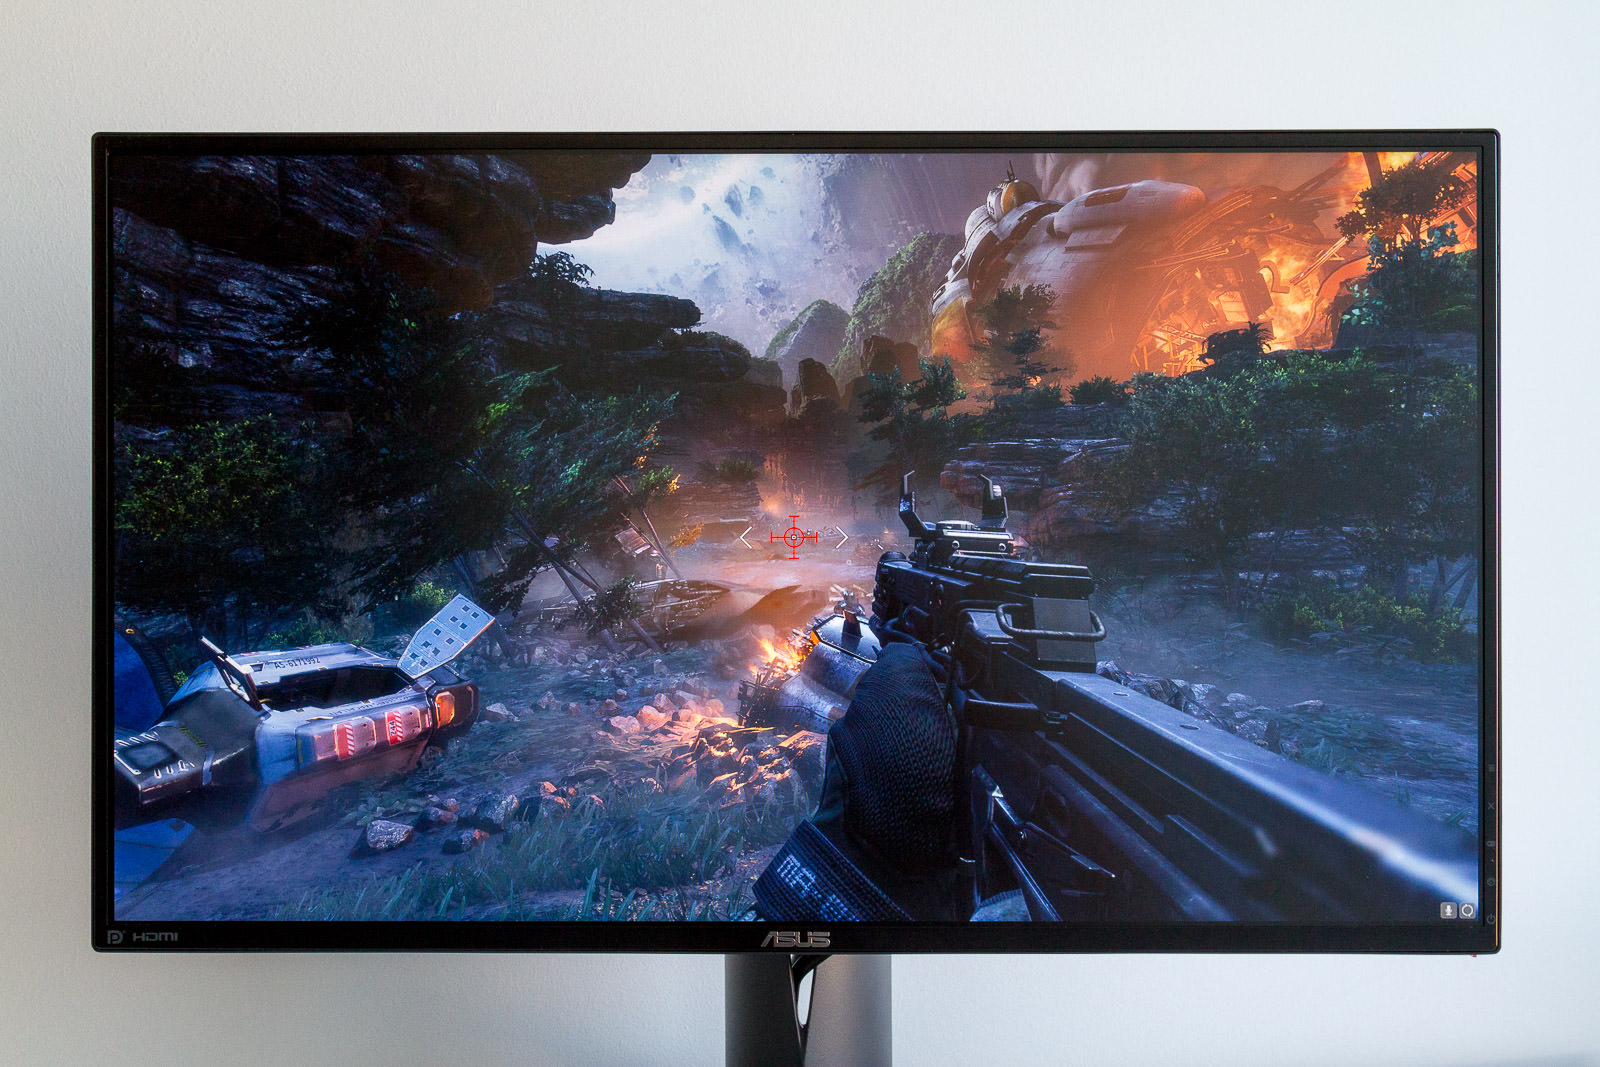 The PG279Q's IPS panel in all its high refresh rate glory.